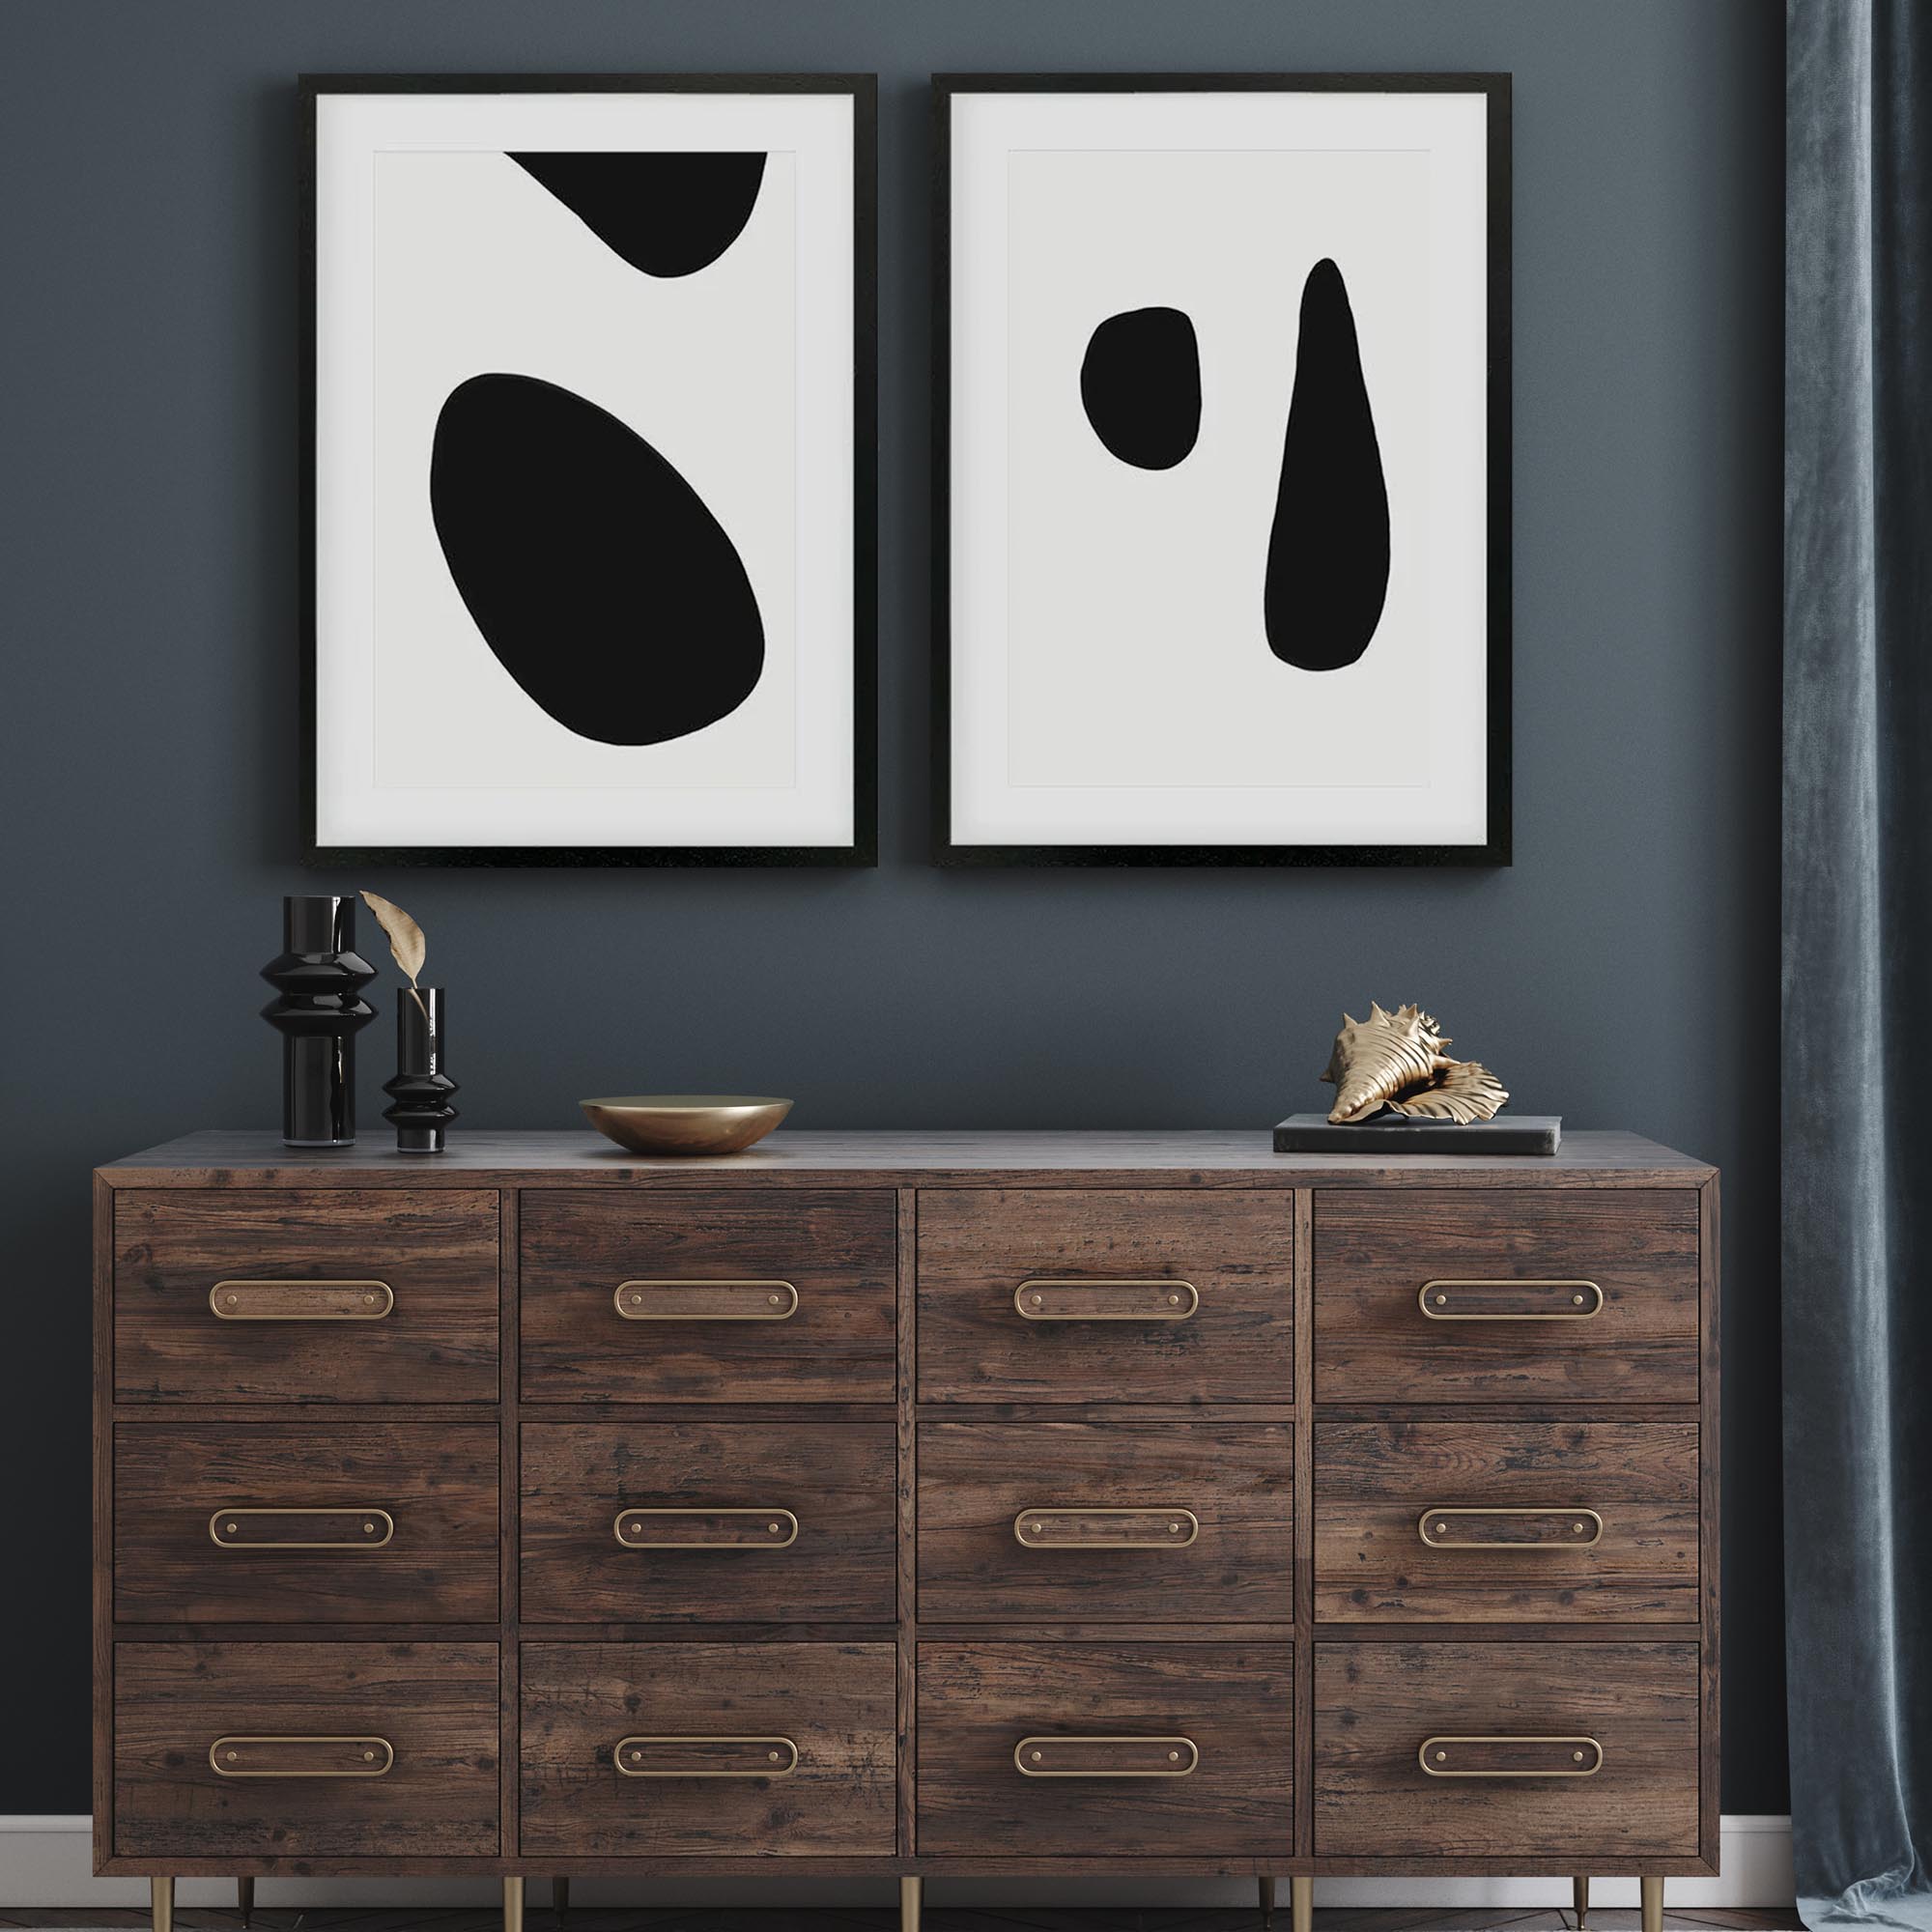 Black & White Shapes - Print Set Of 2-Abstract House